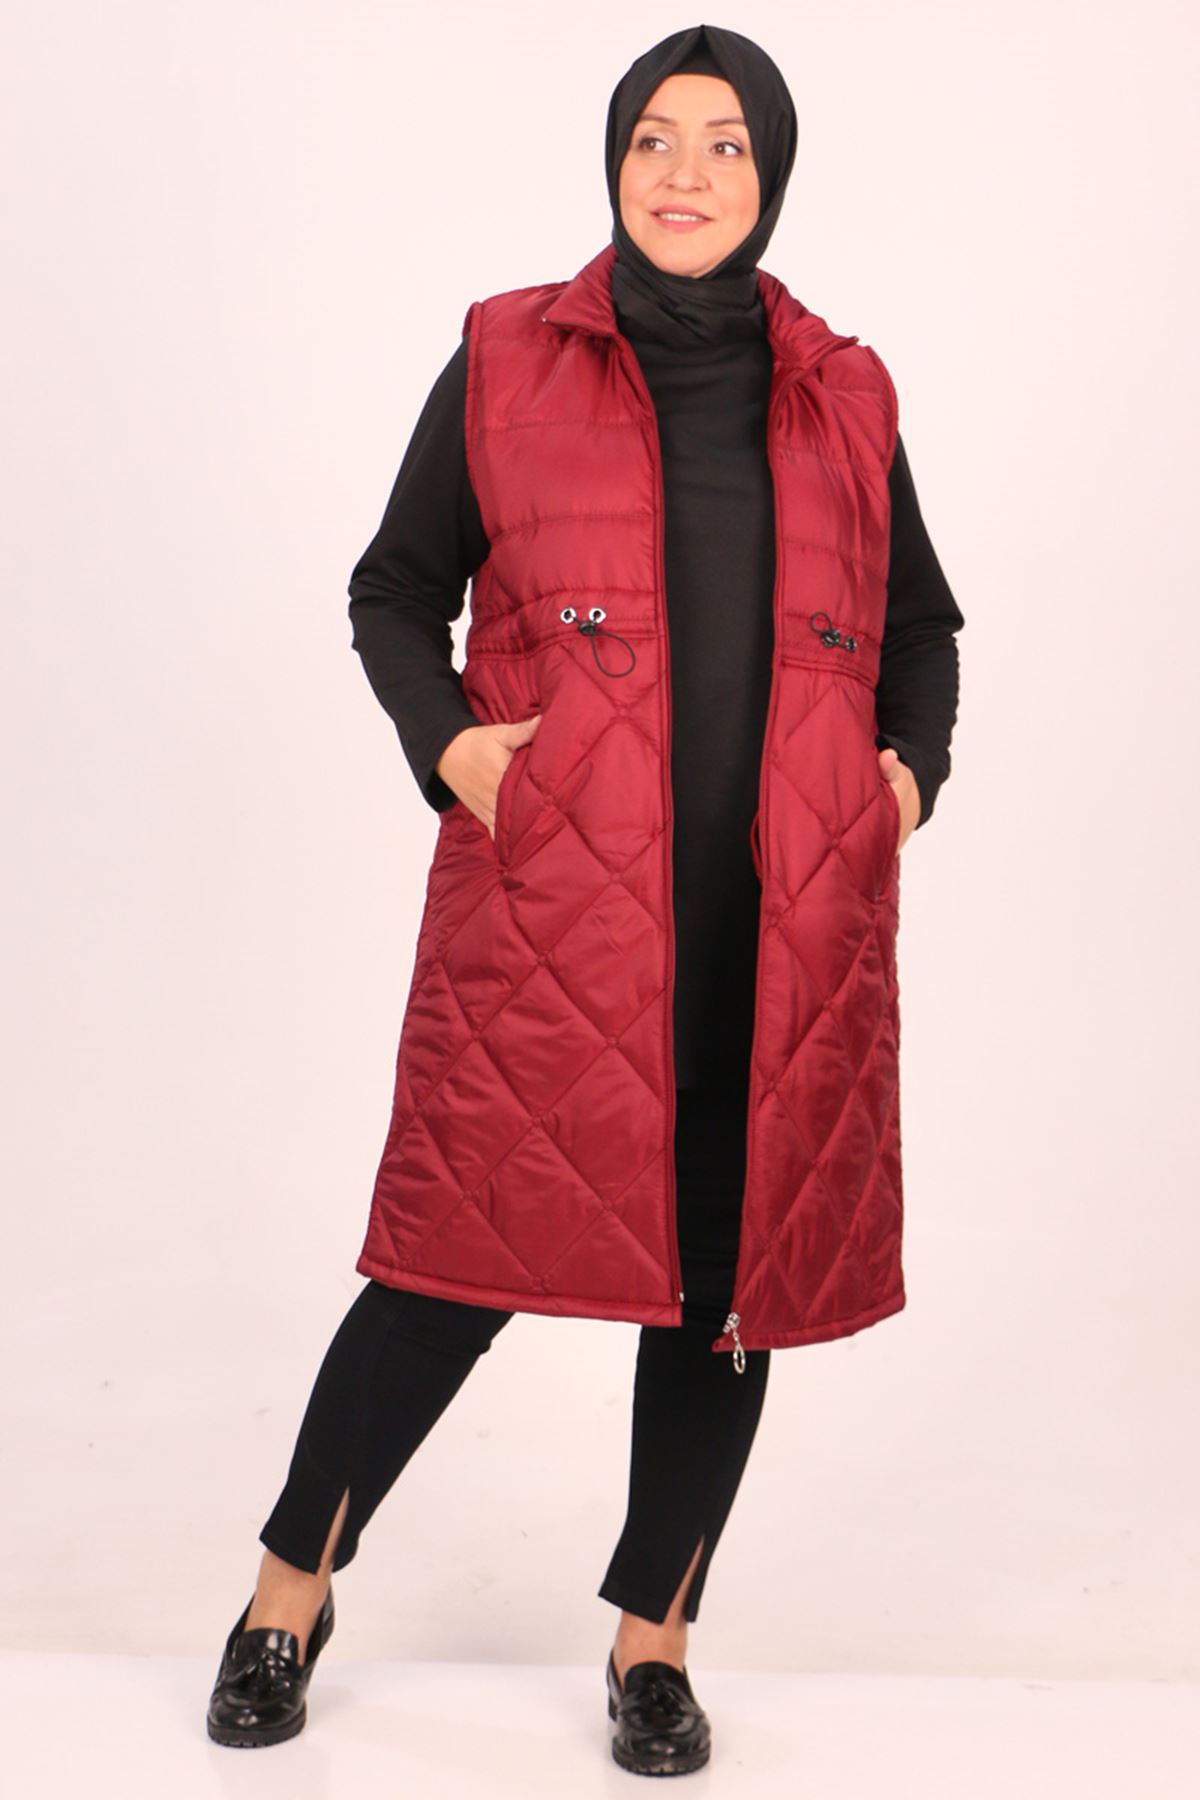 34014 Large Size Quilted Vest with Elastic Waist-Burgundy